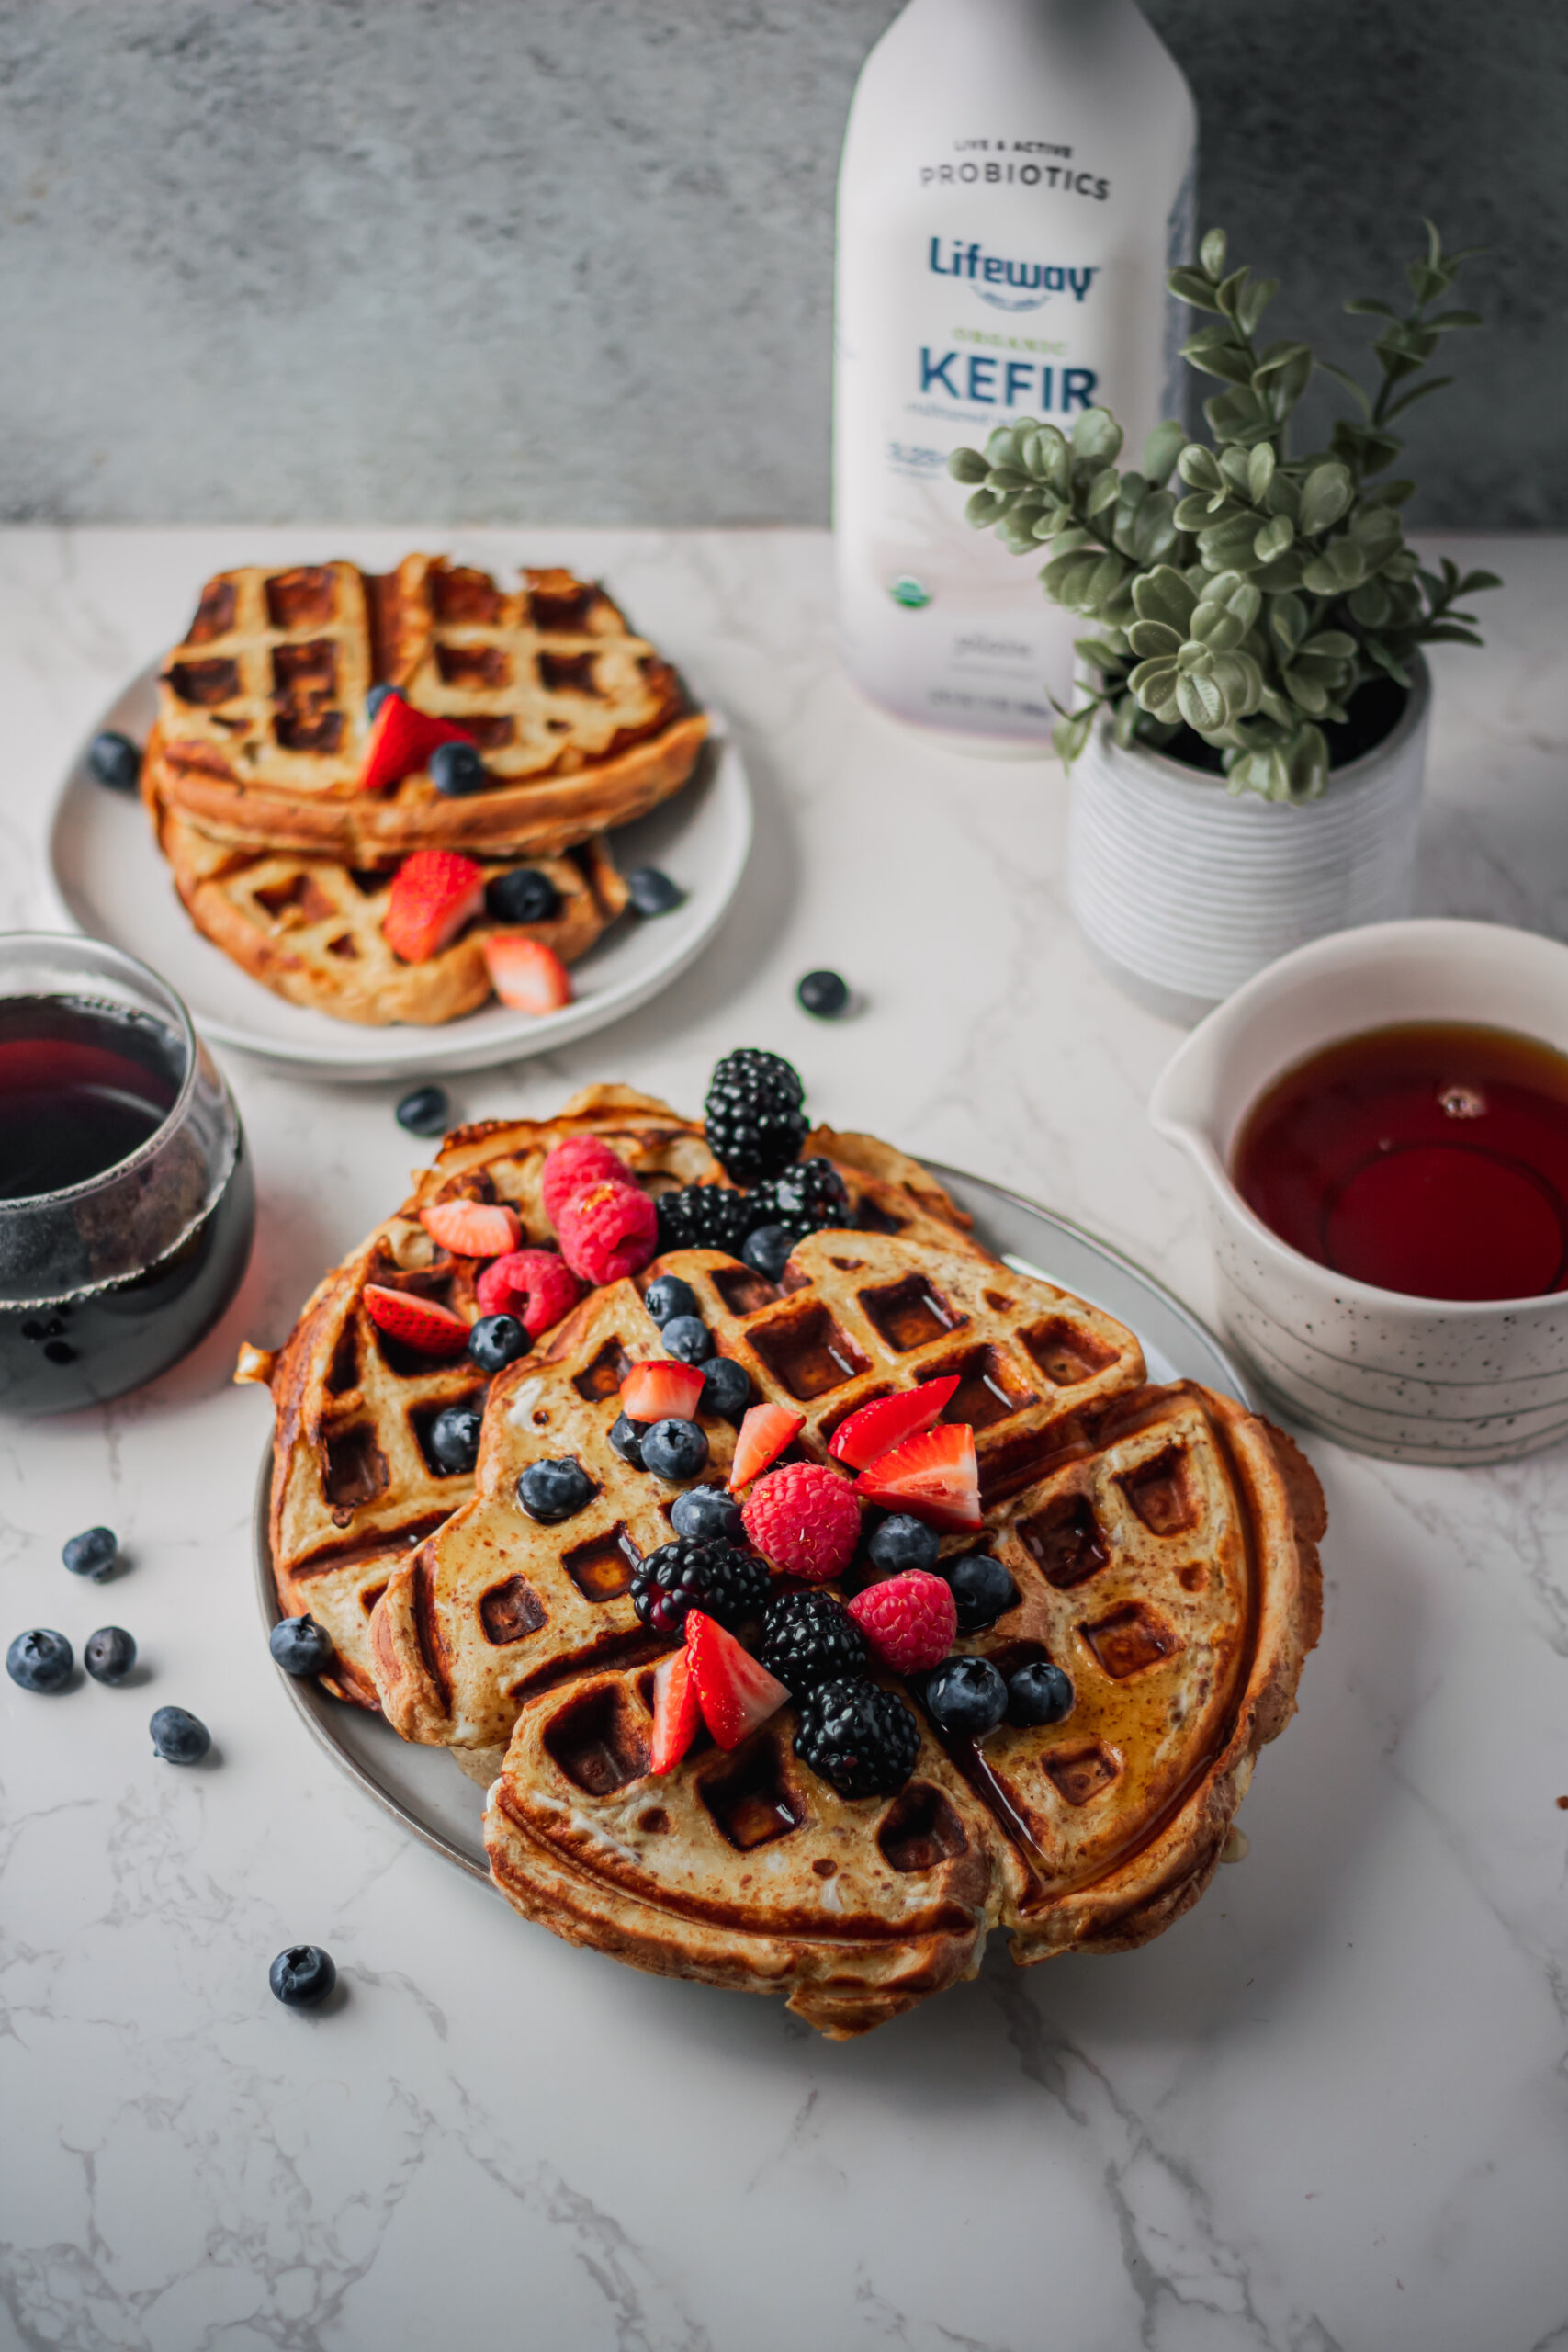 The One Ingredient an Inflammation Expert Wants You To Add to Your Pancakes and Waffles